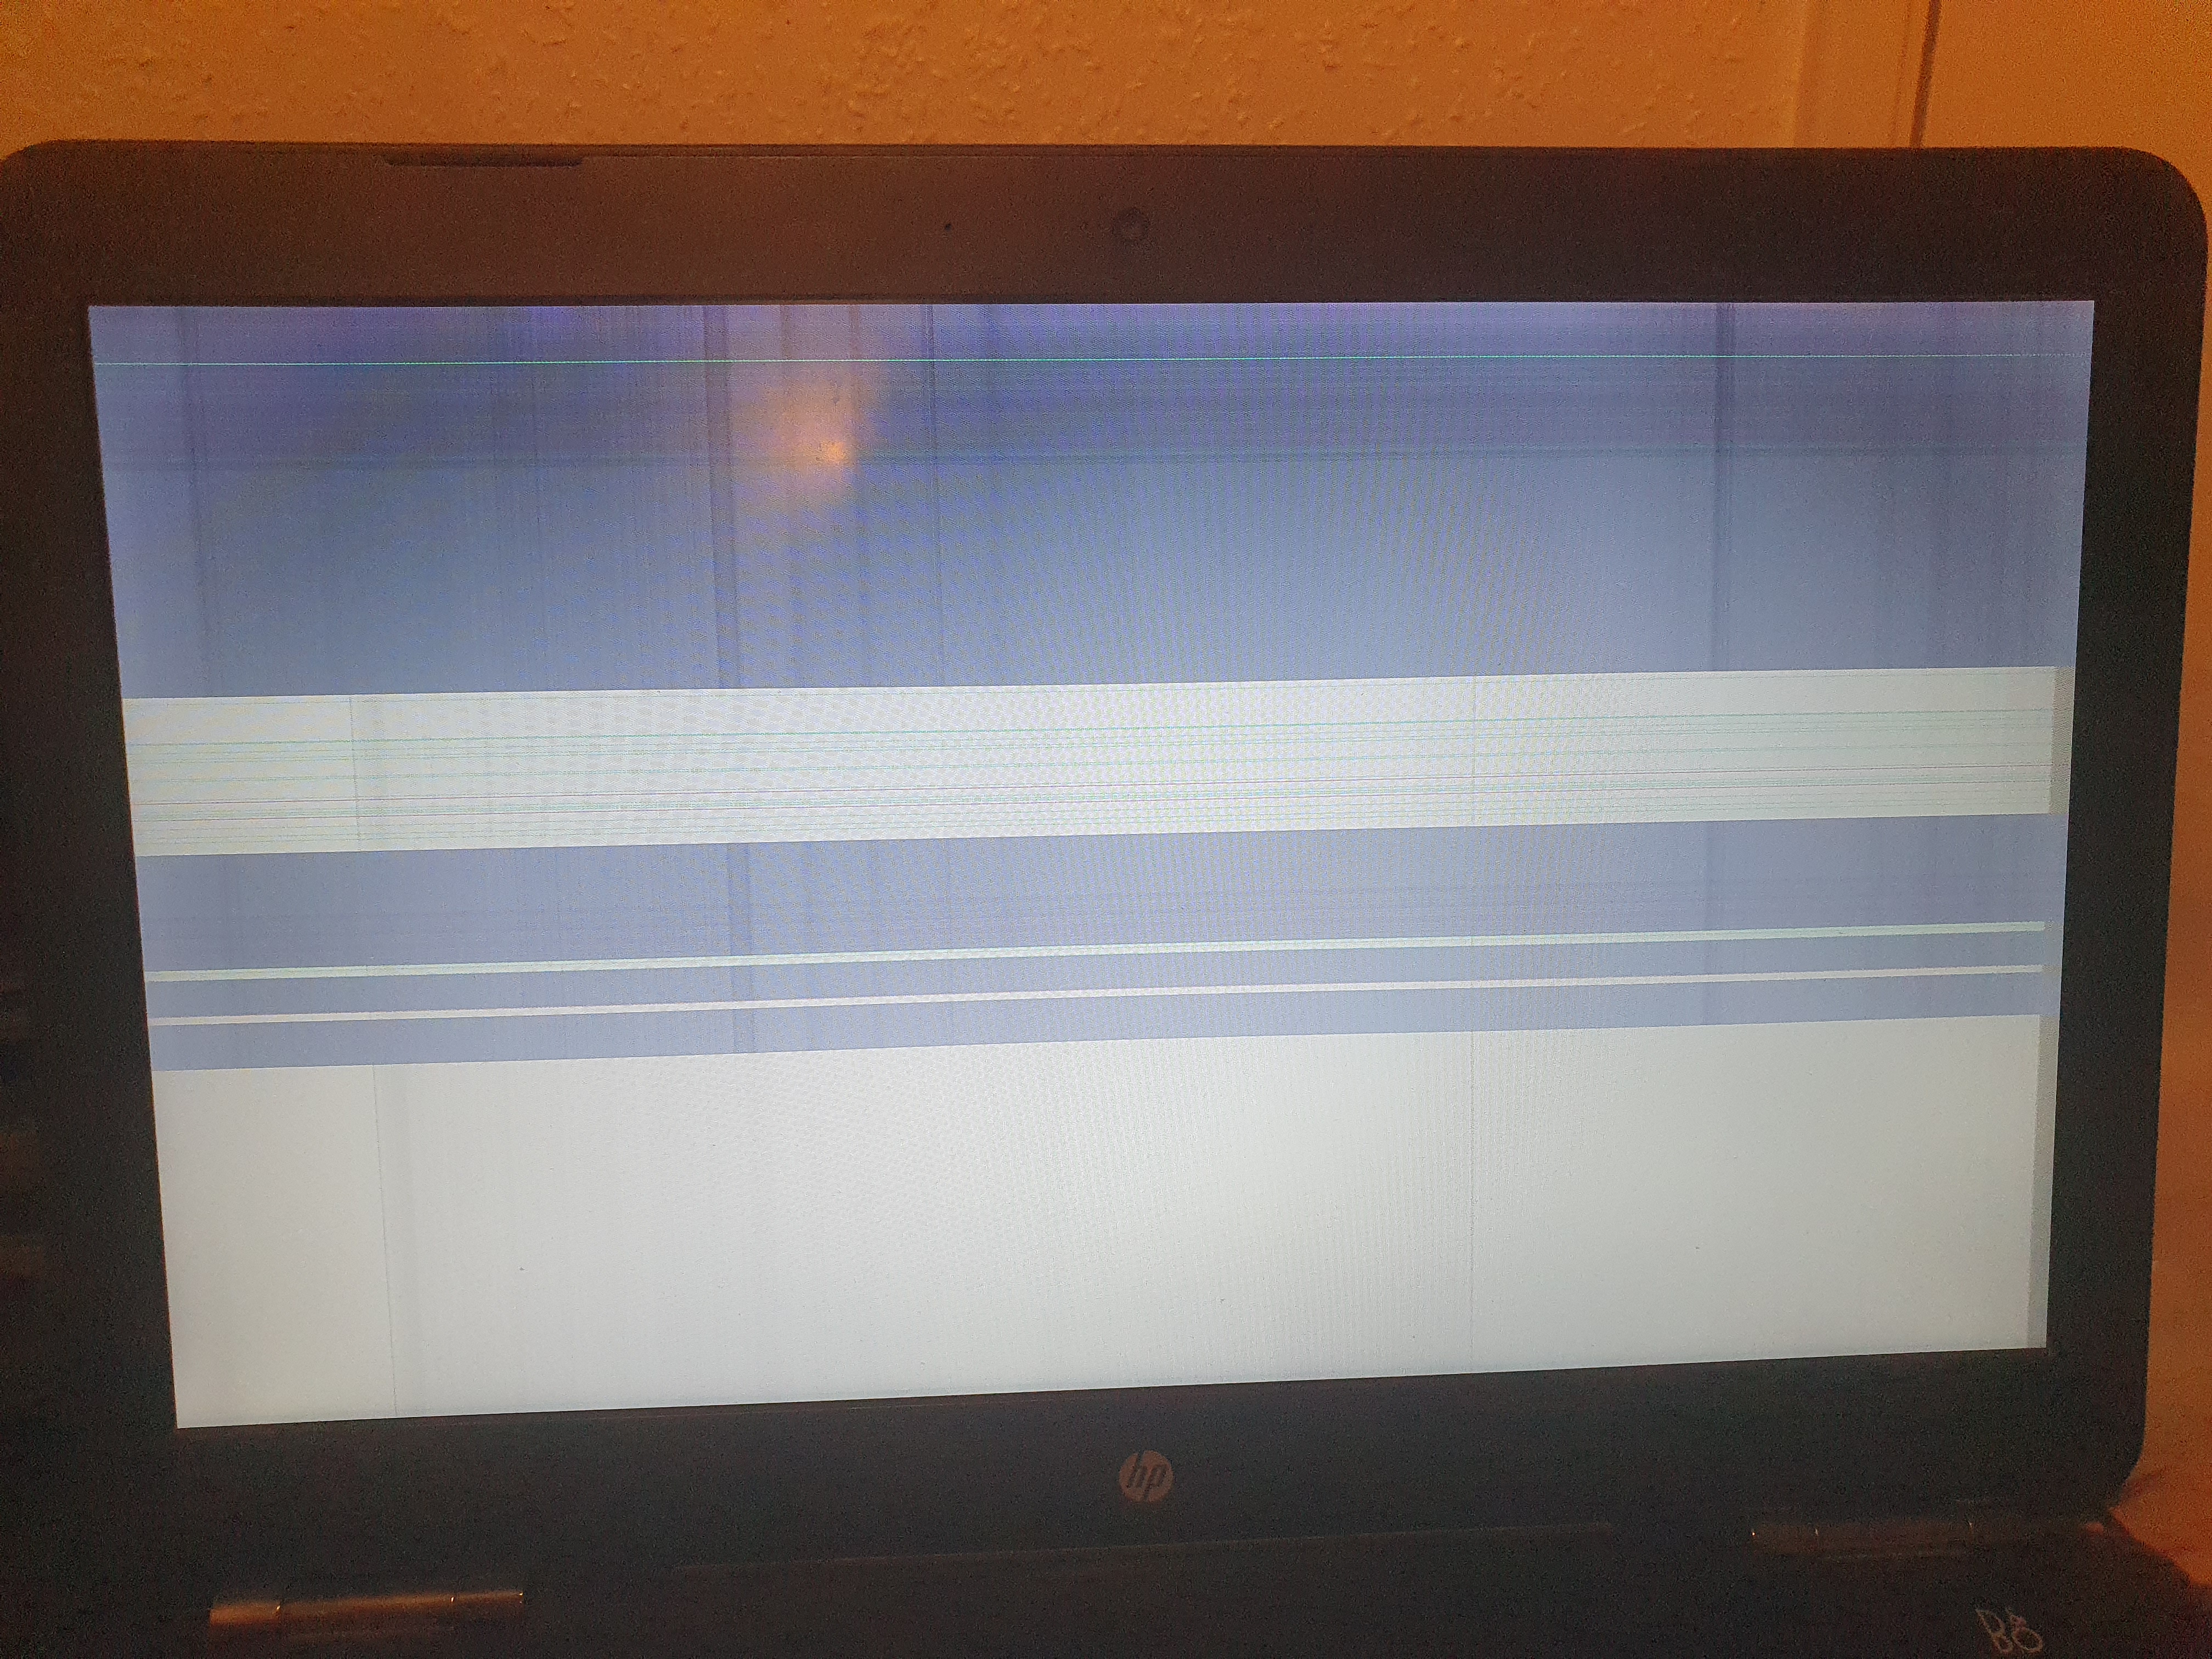 HP Laptop - Blurry and Fuzzy Screen - HP Support Community - 7738943